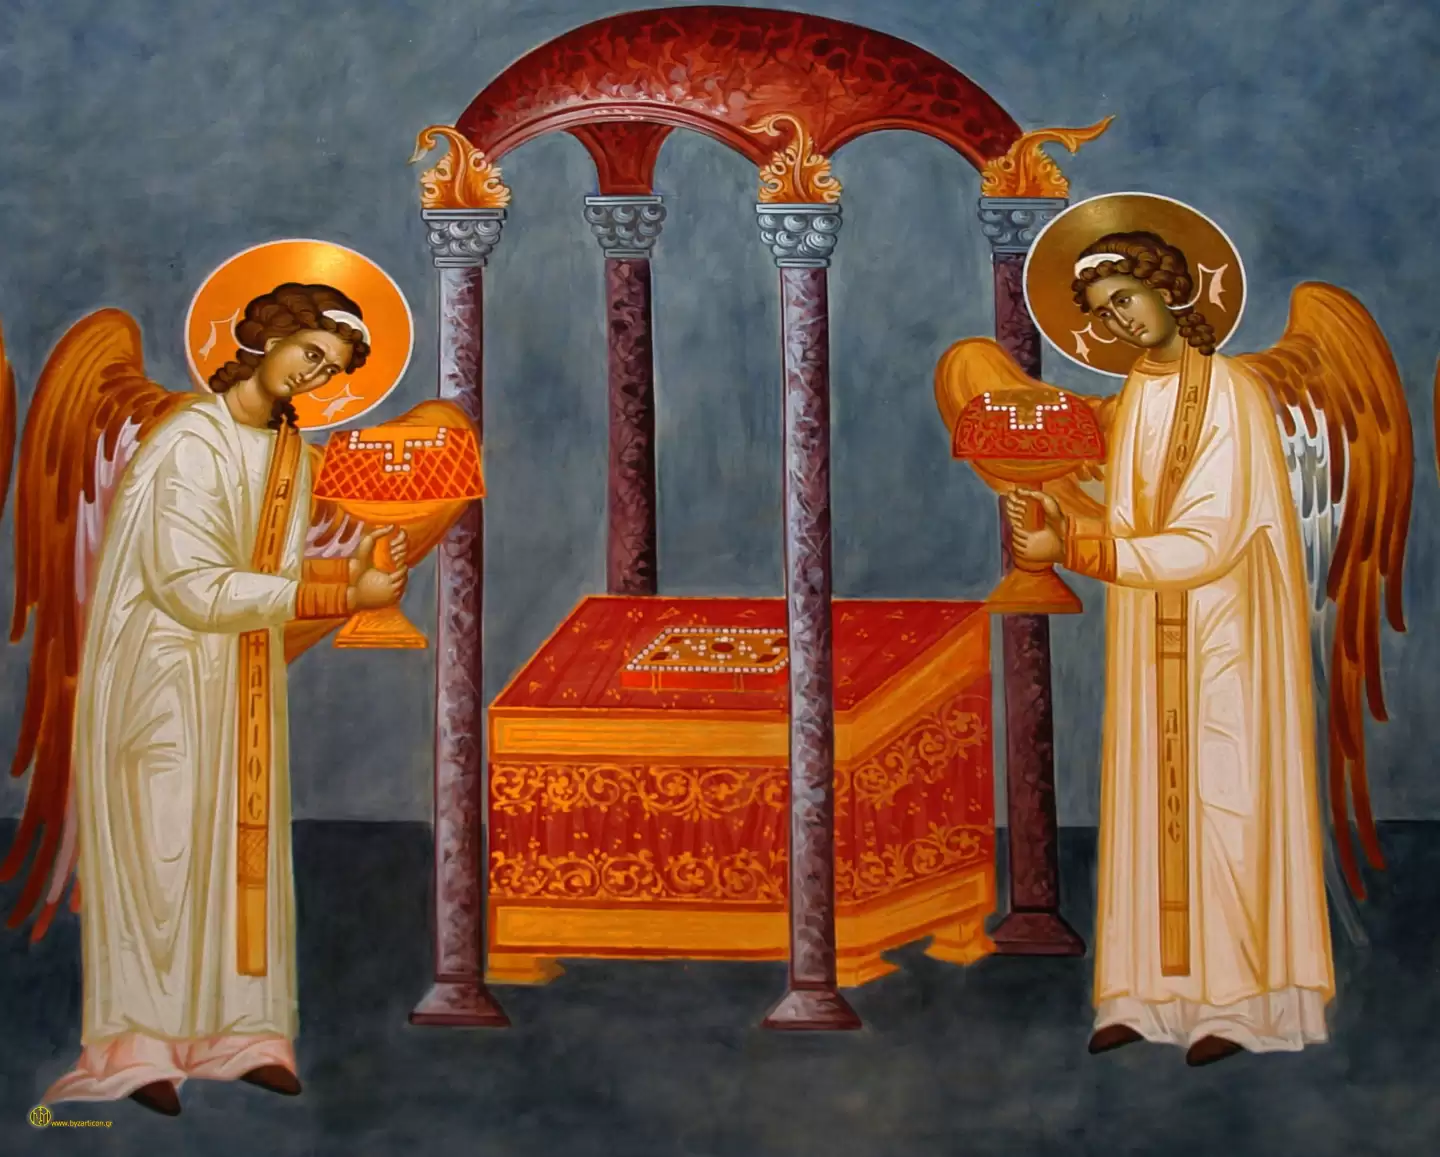 ANGELS SERVING IN THE DIVINE LITURGY, DETAIL 6